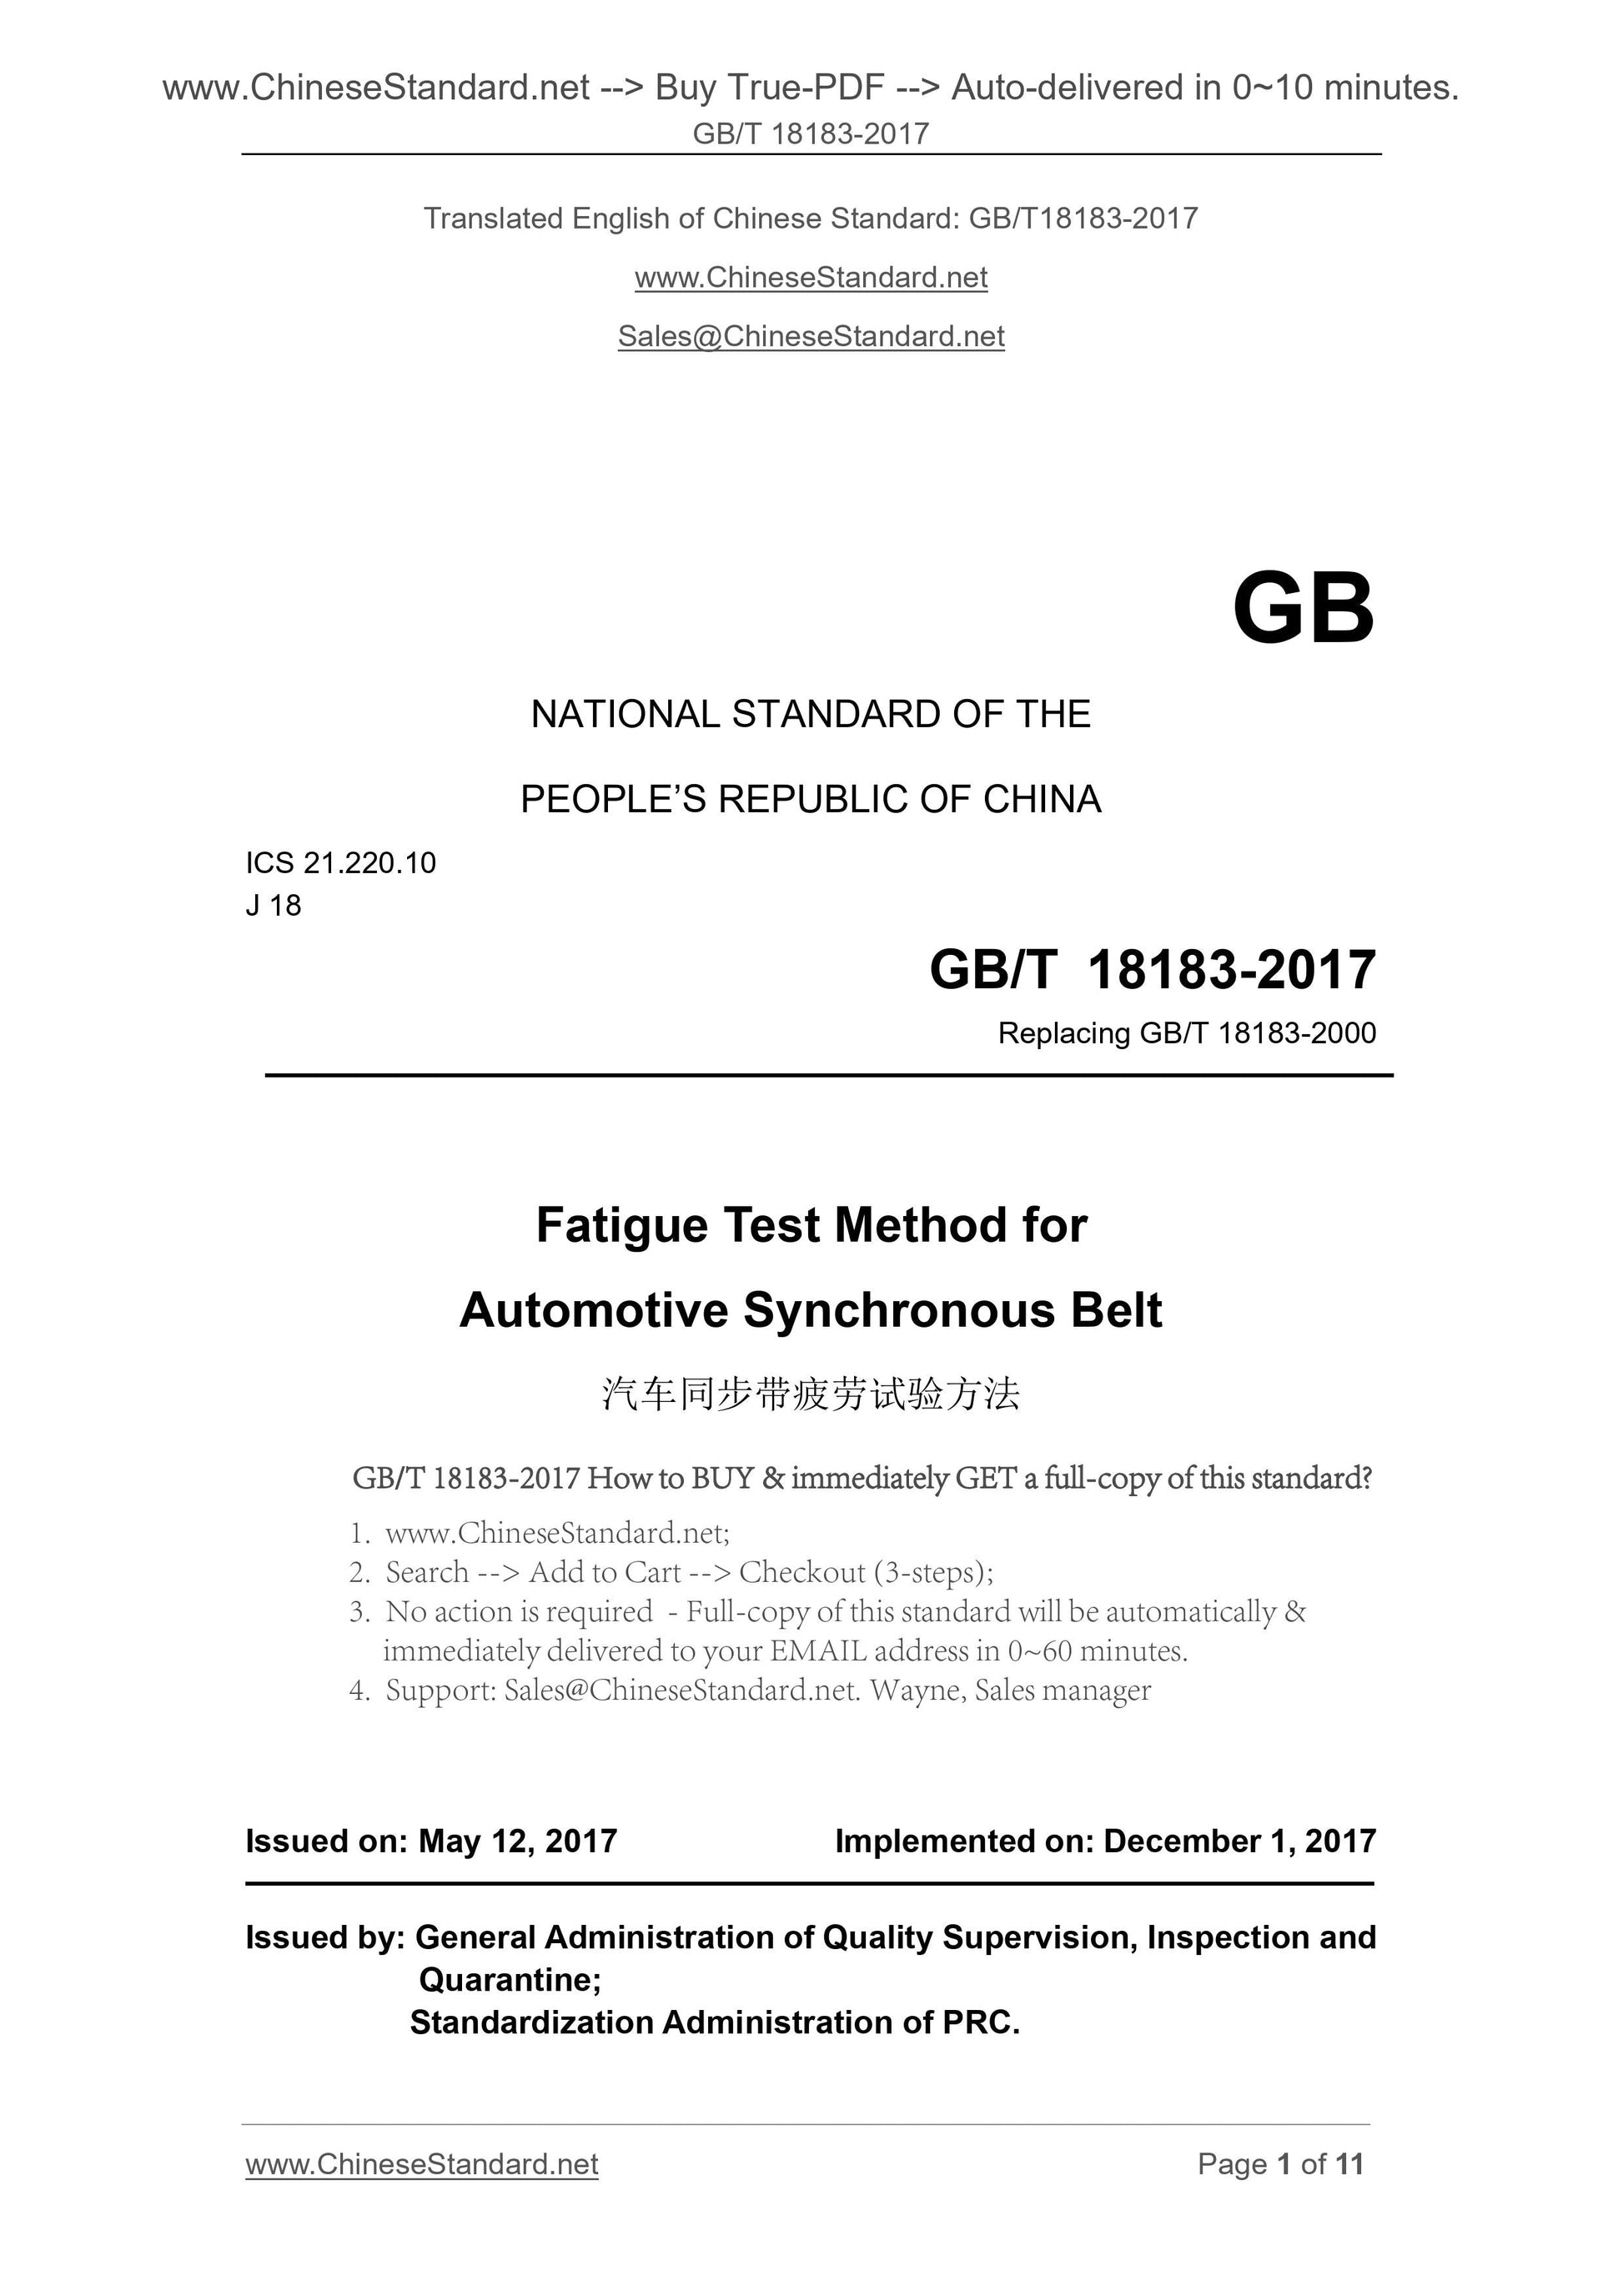 GB/T 18183-2017 Page 1